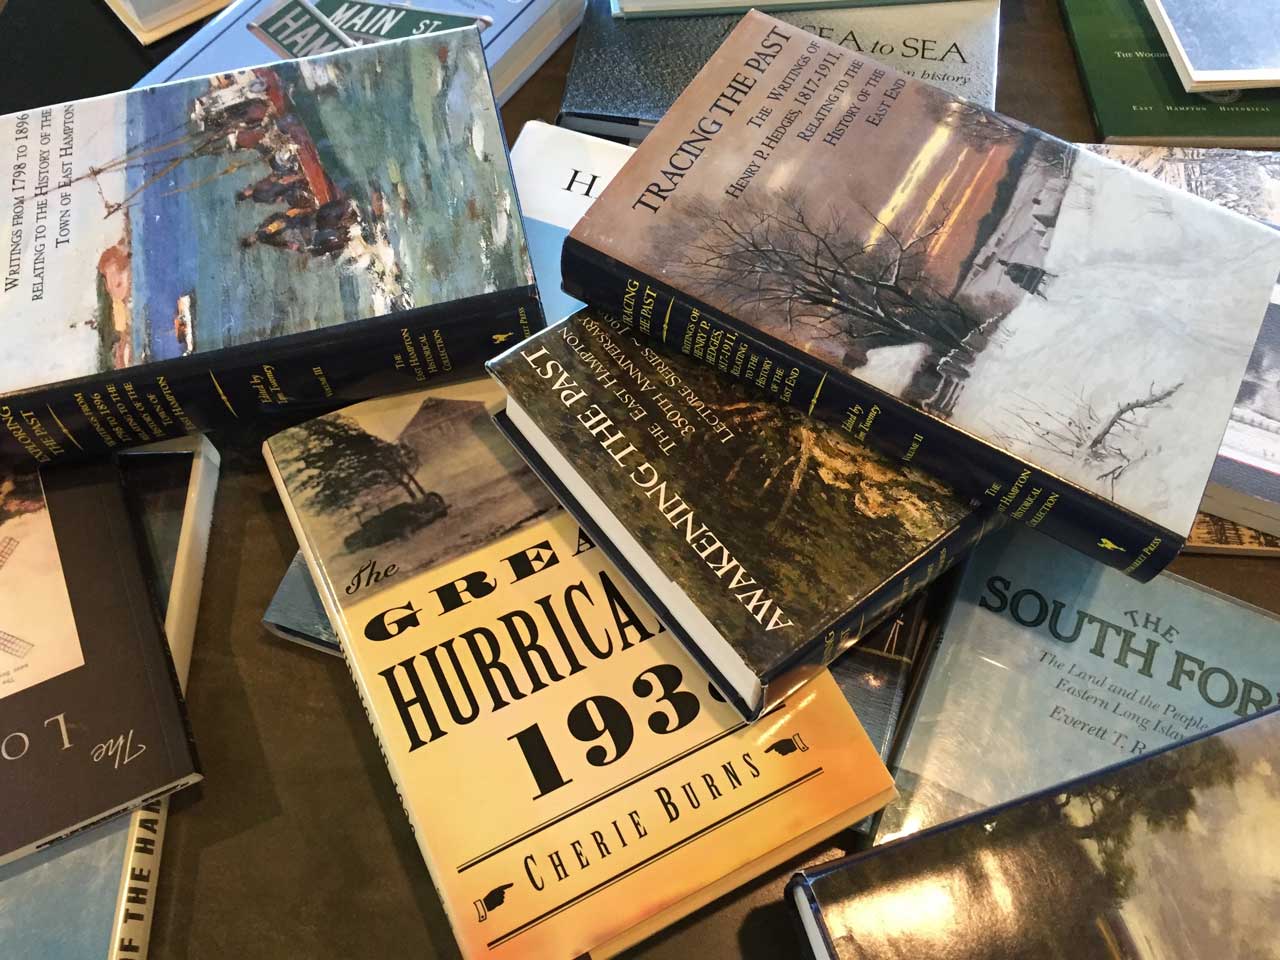 Photograph of More Non-Fiction Books About the Hamptons